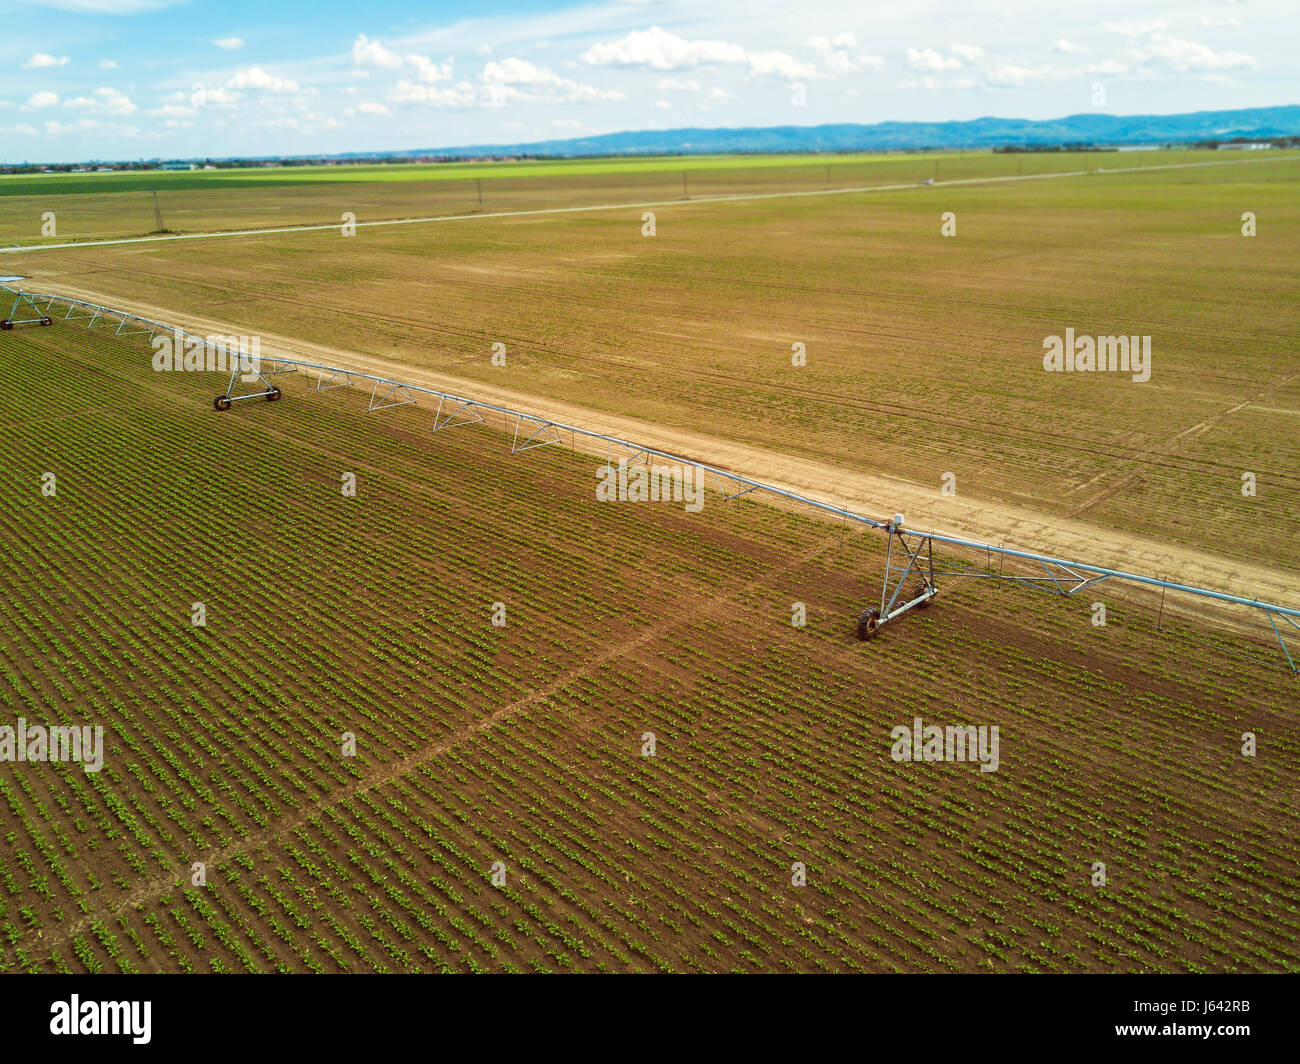 Agricultural irrigation system on cultivated sugar beet plantation viewed from drone point of view Stock Photo